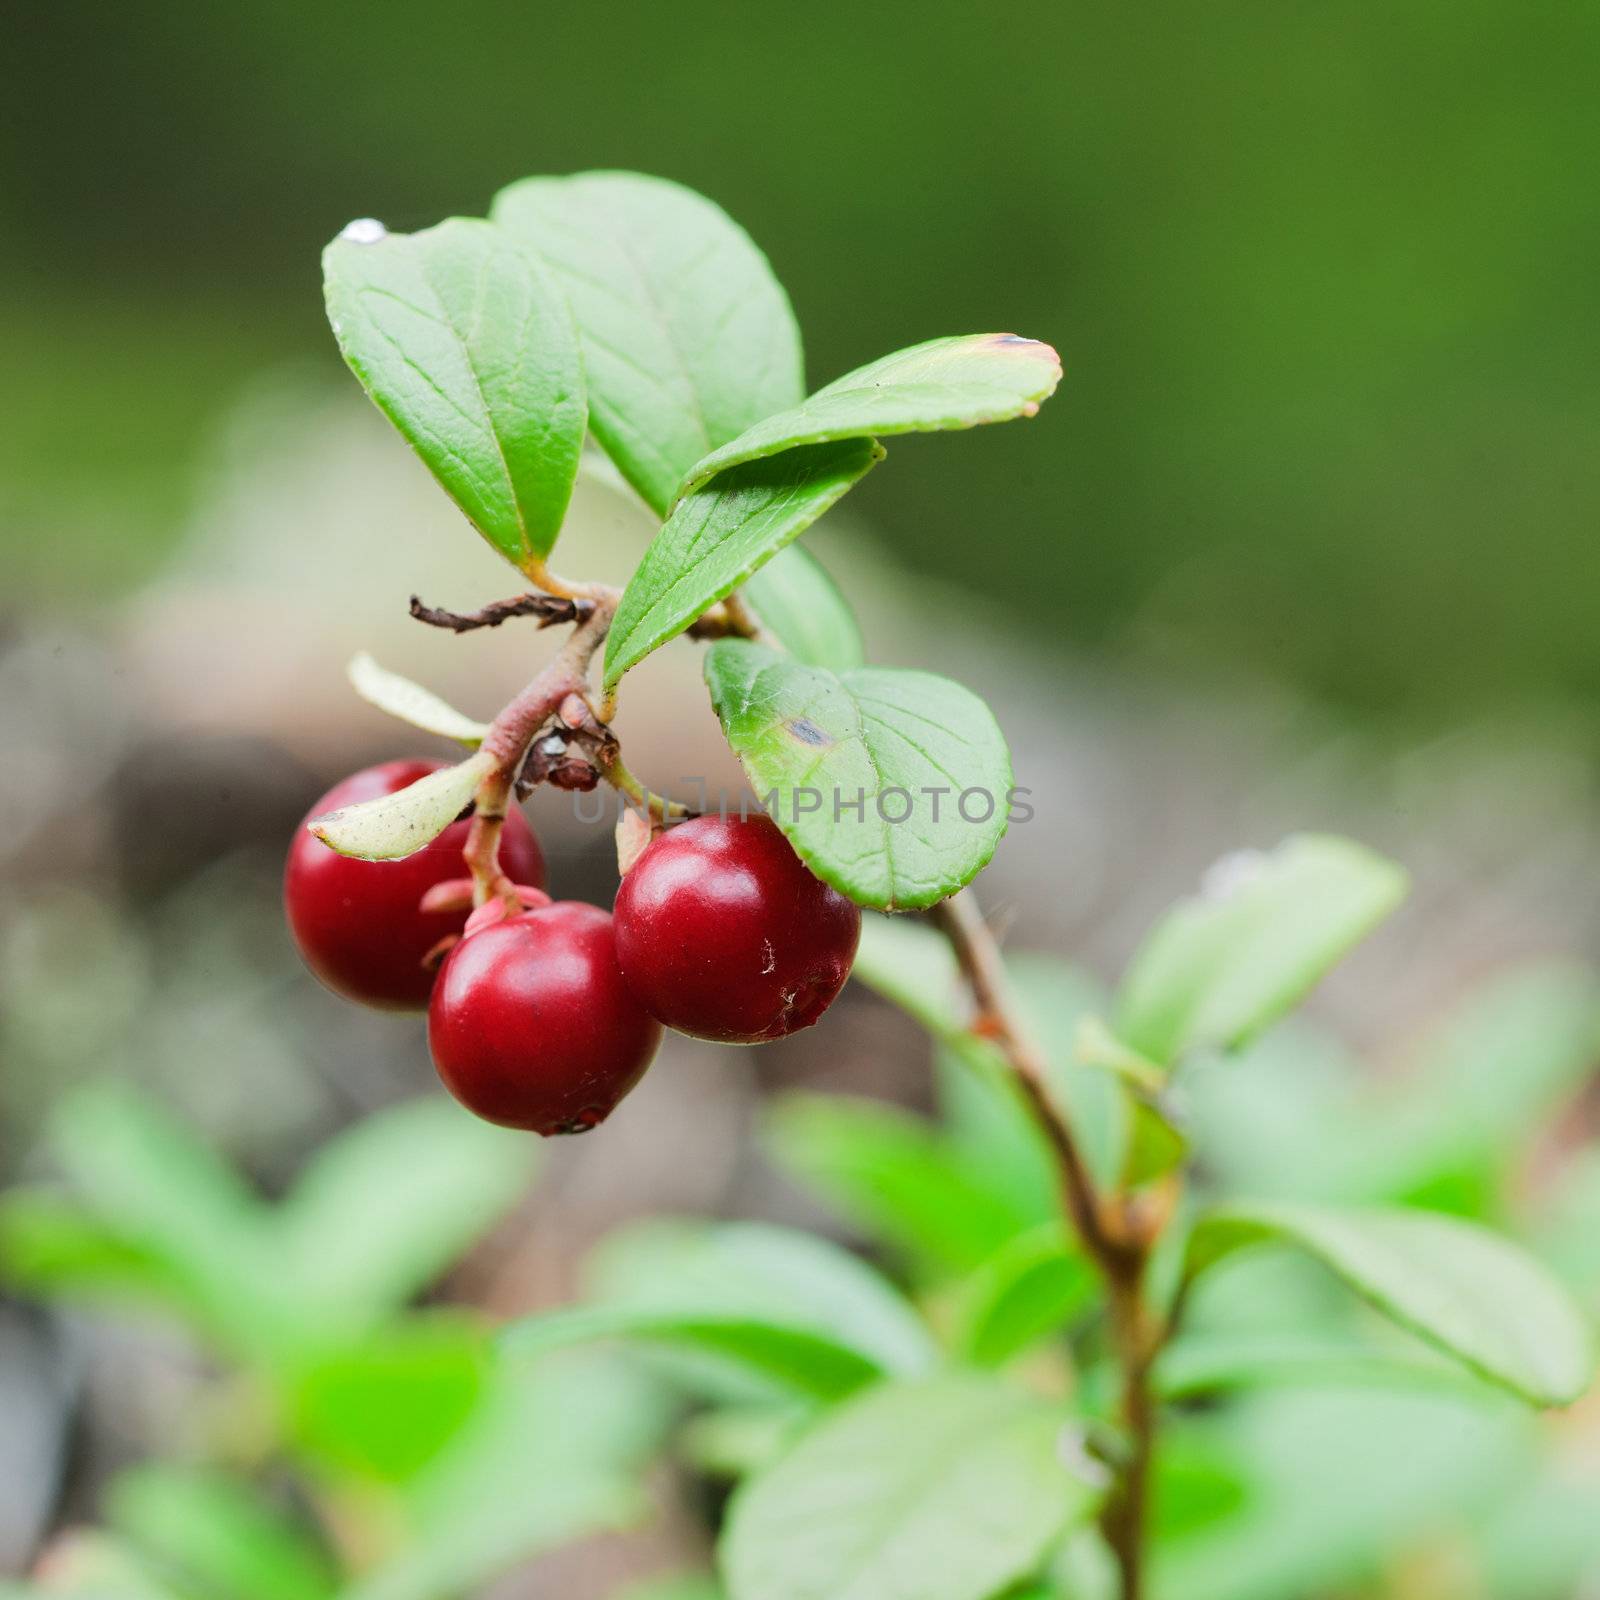 Cowberry. A cowberry on a green vegetative background in wood.